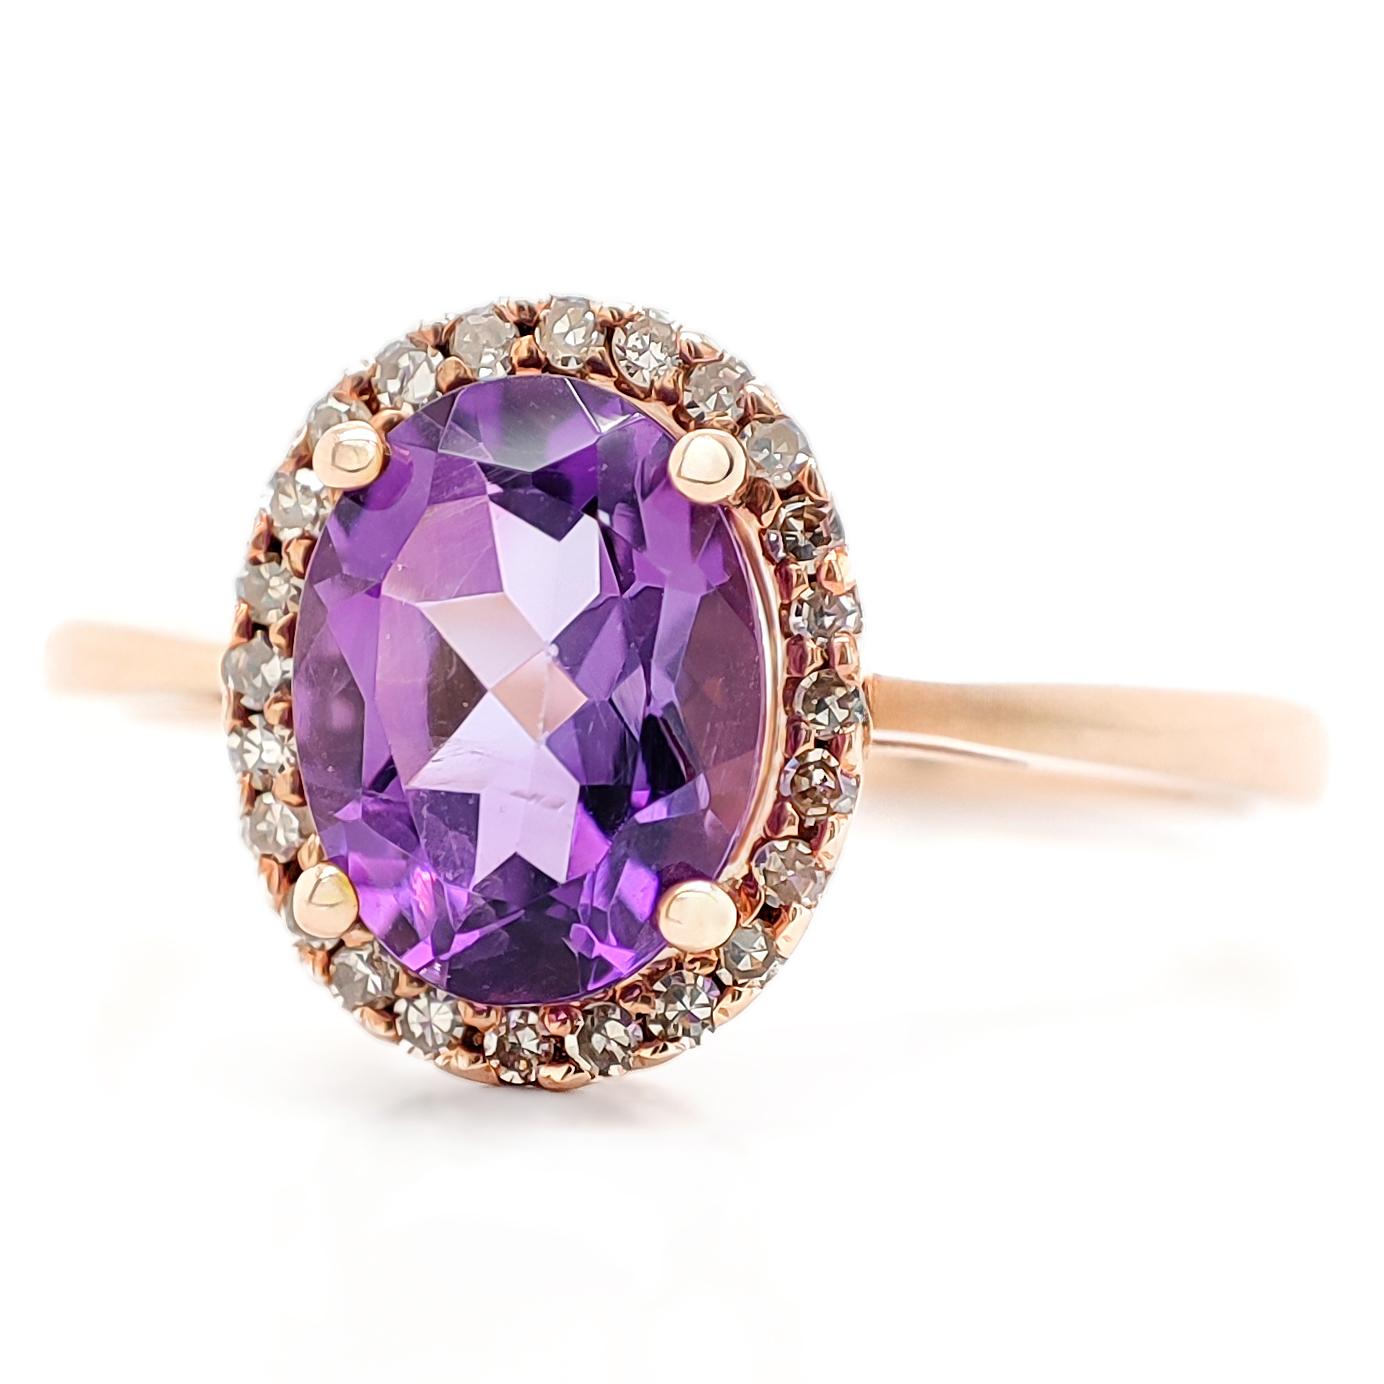 FOR US BUYERS NO VAT

This engagement ring is a testament to love and passion. At its heart, it features a captivating 1.20-carat oval purple amethyst symbolizing the fiery intensity of your love.

To accentuate the amethyst's beauty, the ring is